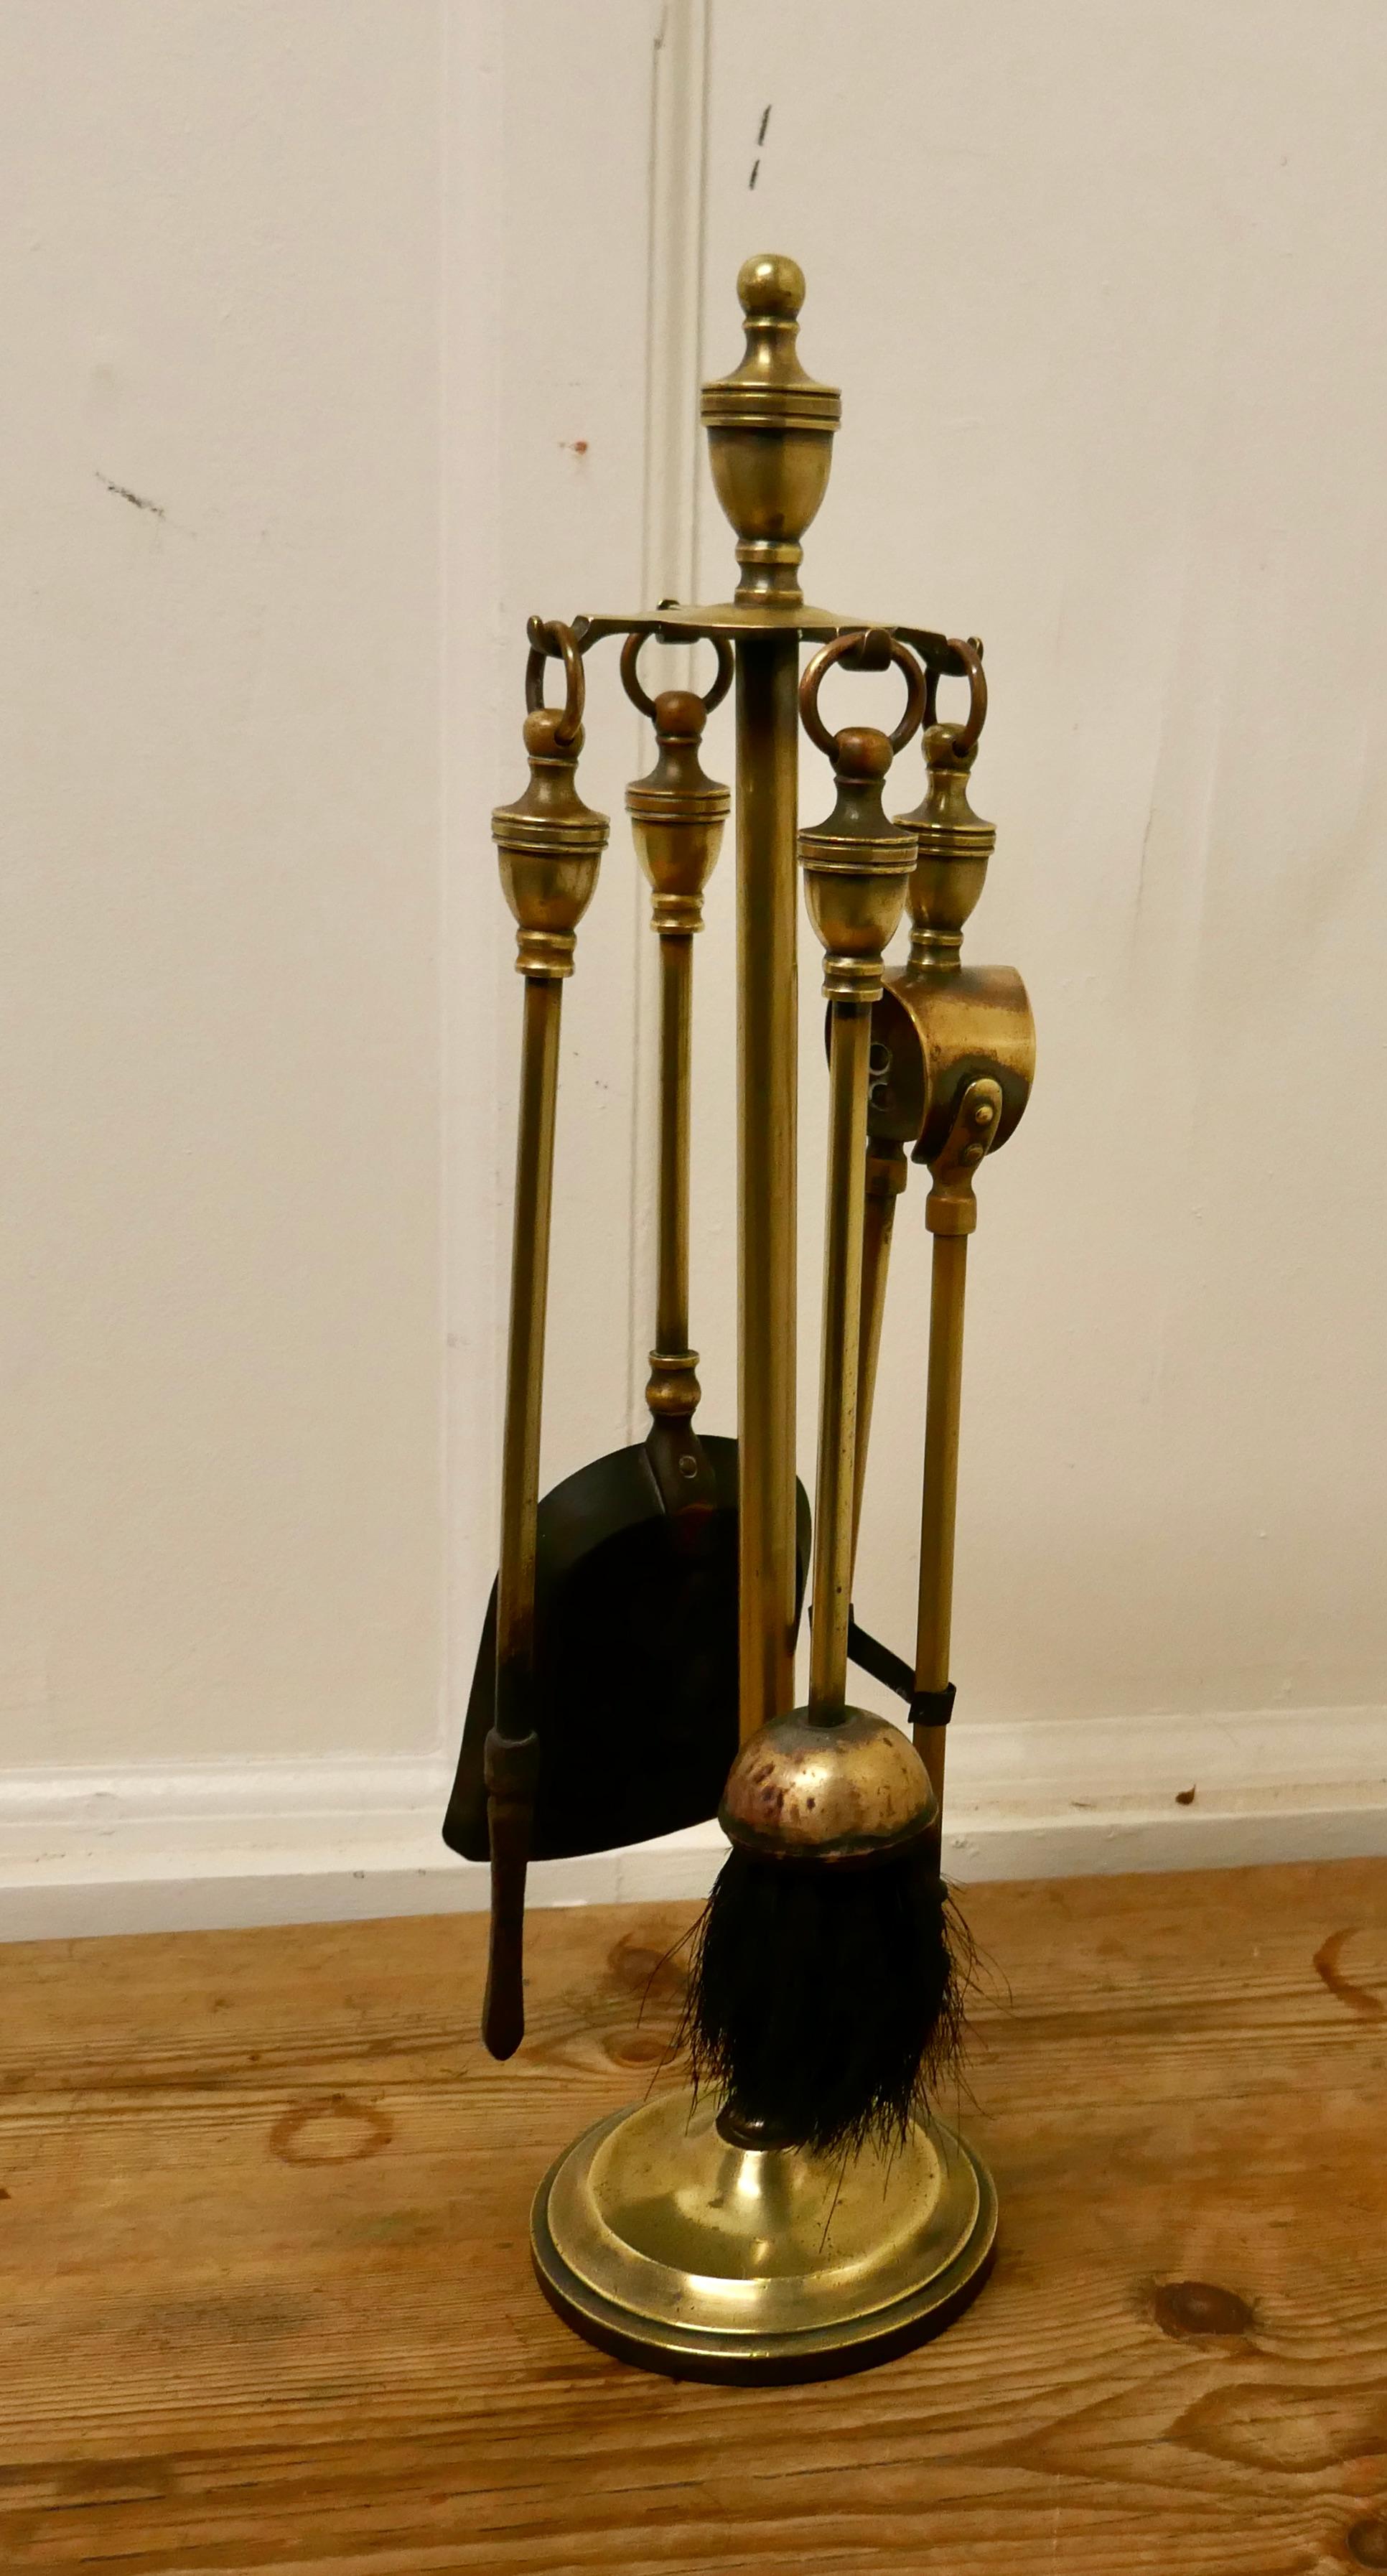 Heavy quality brass fireside companion set, fireside tools

This is a heavy quality set on its own stand, shovel, tongs, poker and hearth brush

Compact and in good used condition, it stands 22” tall, 6” in diameter
TGB344.